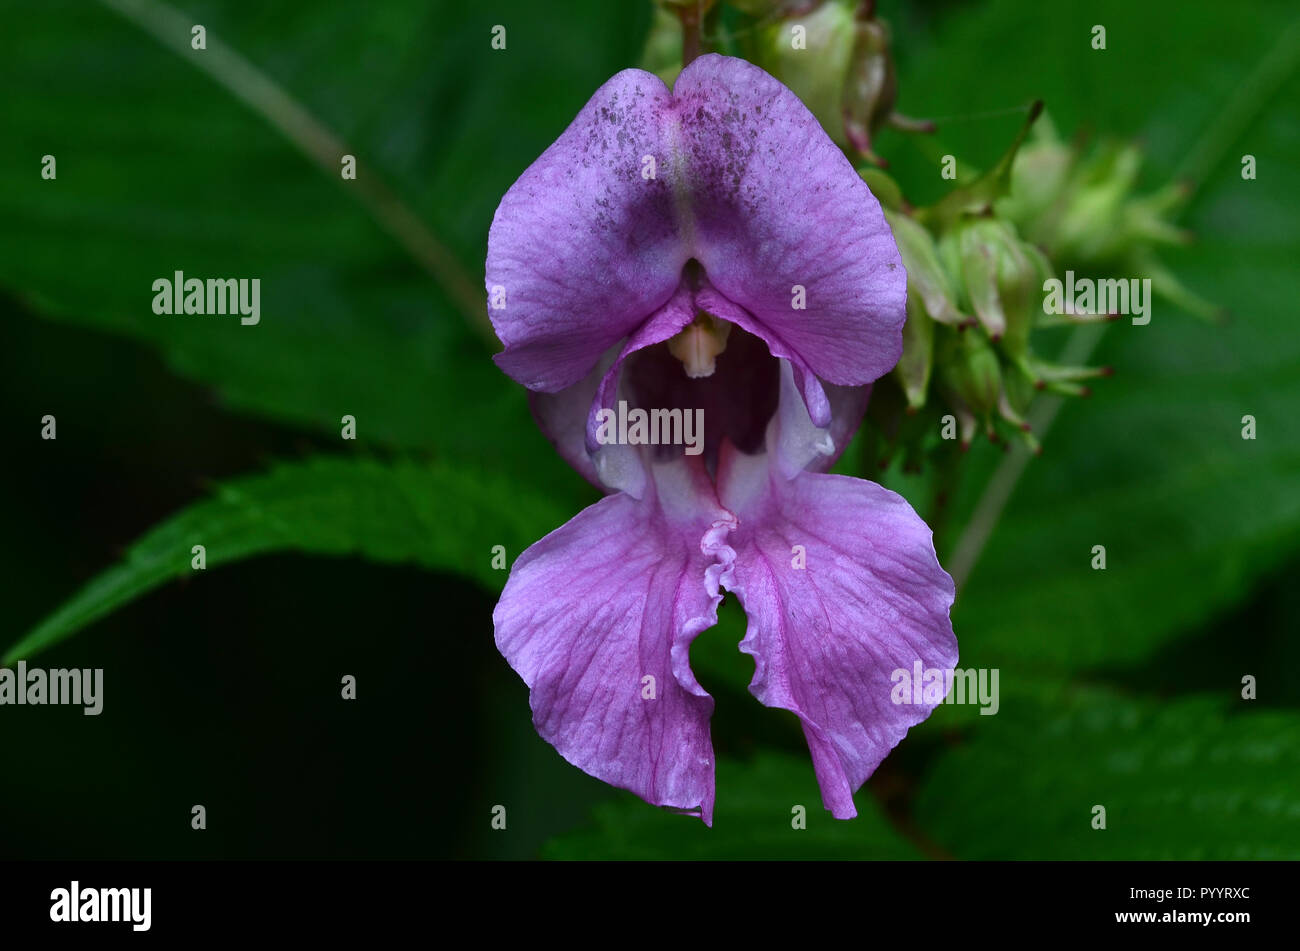 Close up of Indian or Himalayan balsam flower Stock Photo